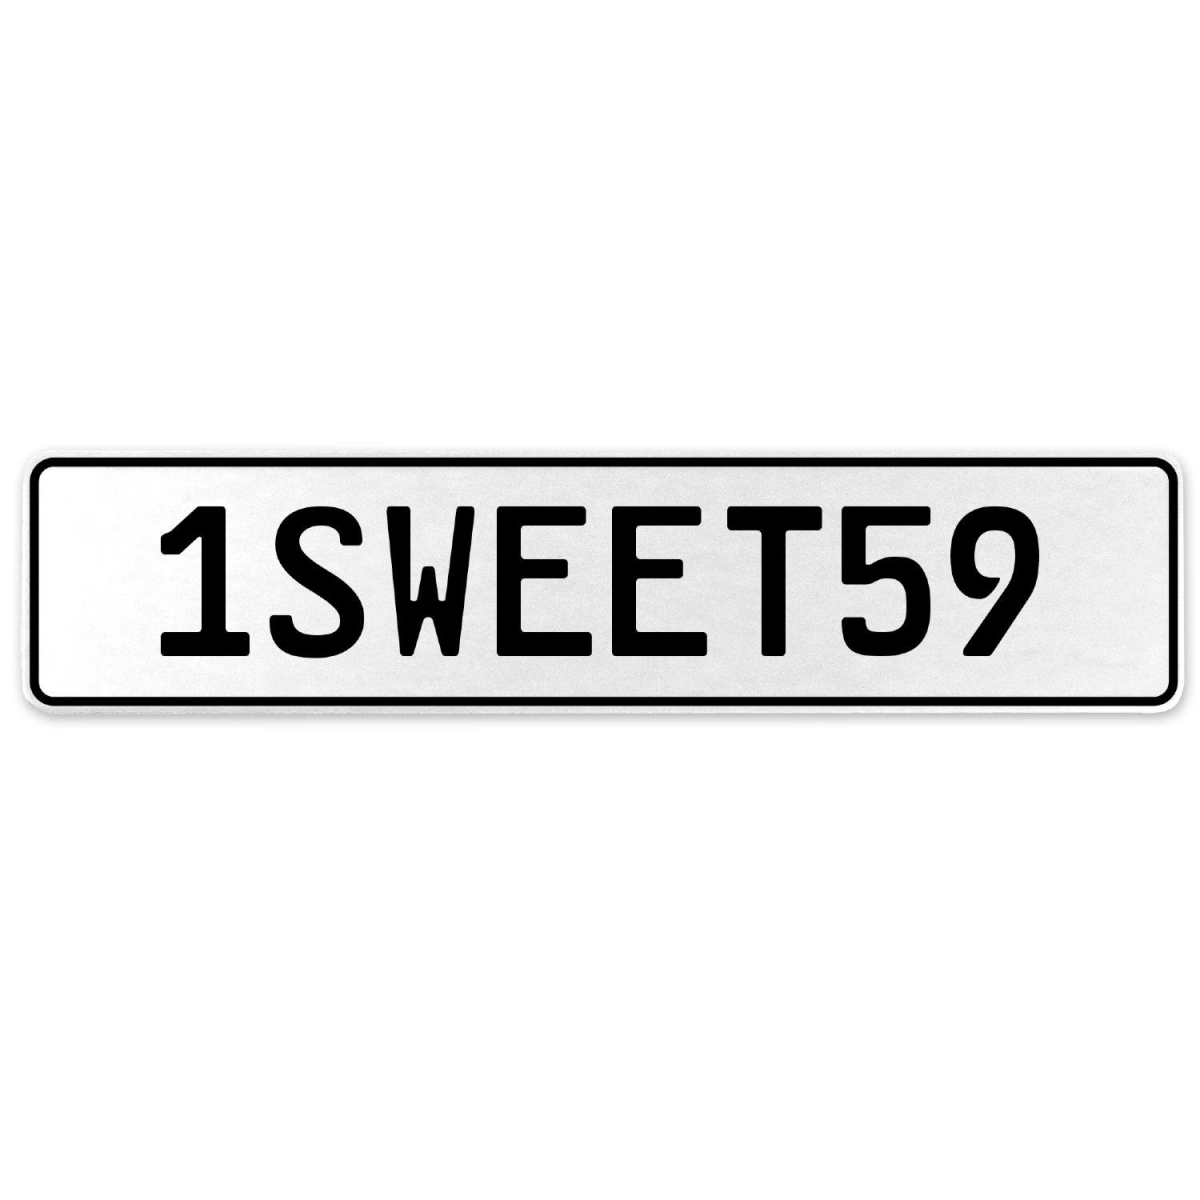 554260 1sweet59 - White Aluminum Street Sign Mancave Euro Plate Name Door Sign Wall